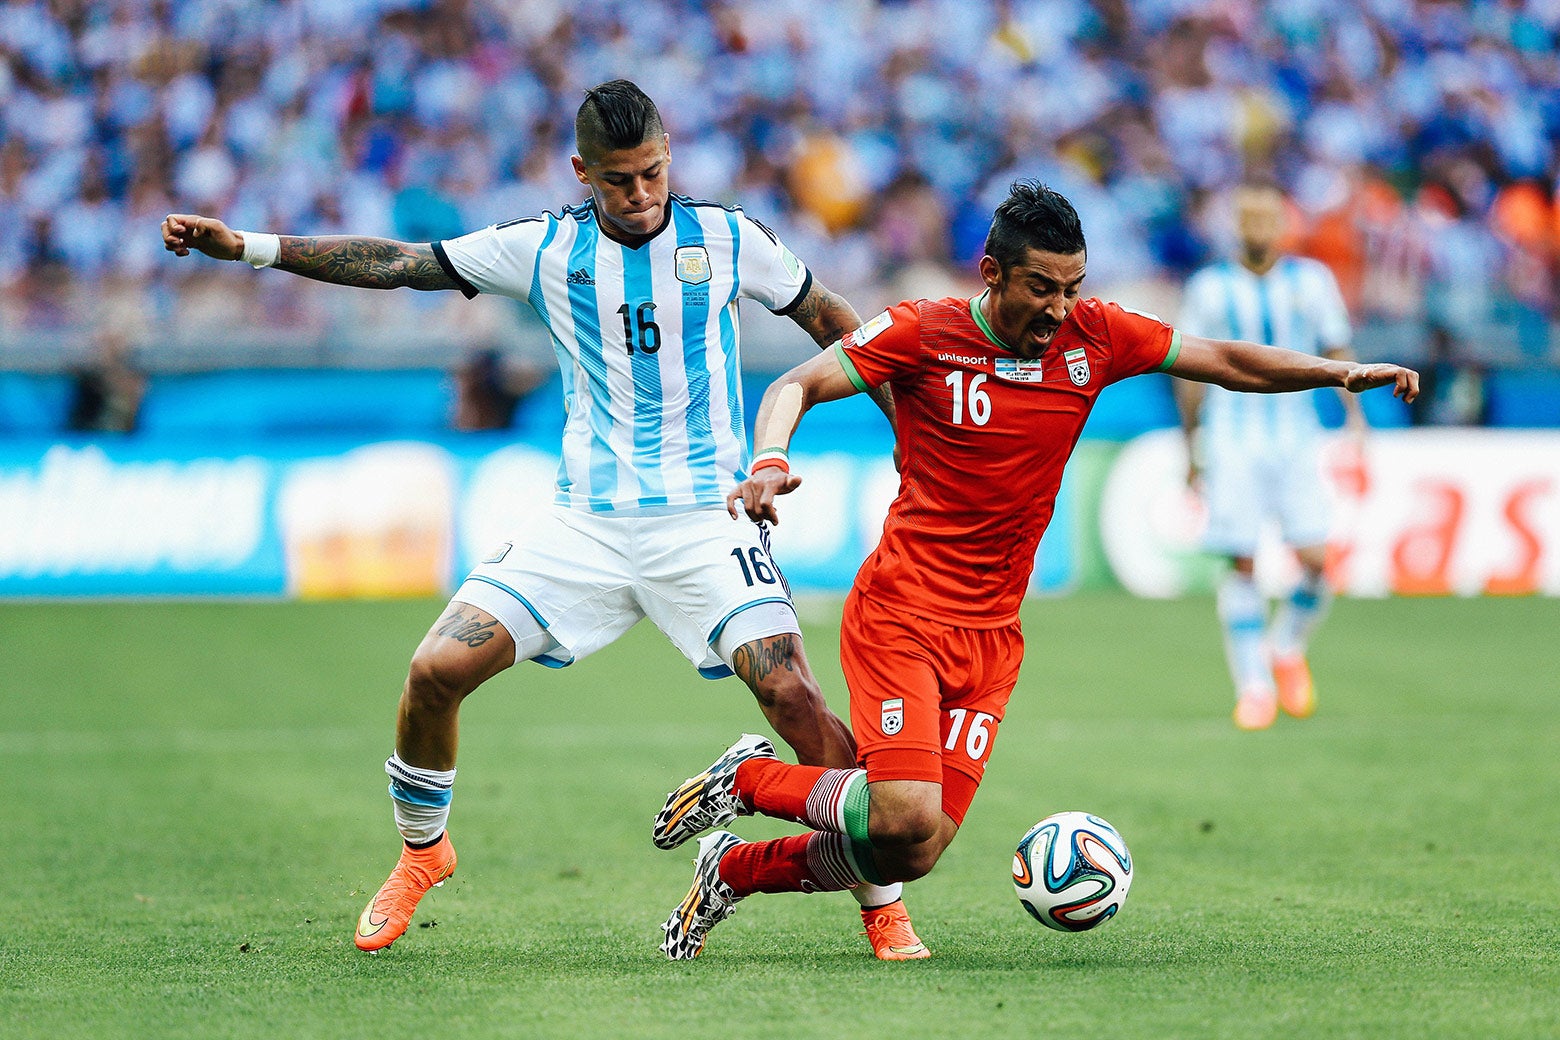 Marcos Rojo’s "pride" and "glory" tattoos are seen on his thighs as he challenges another player for the ball.